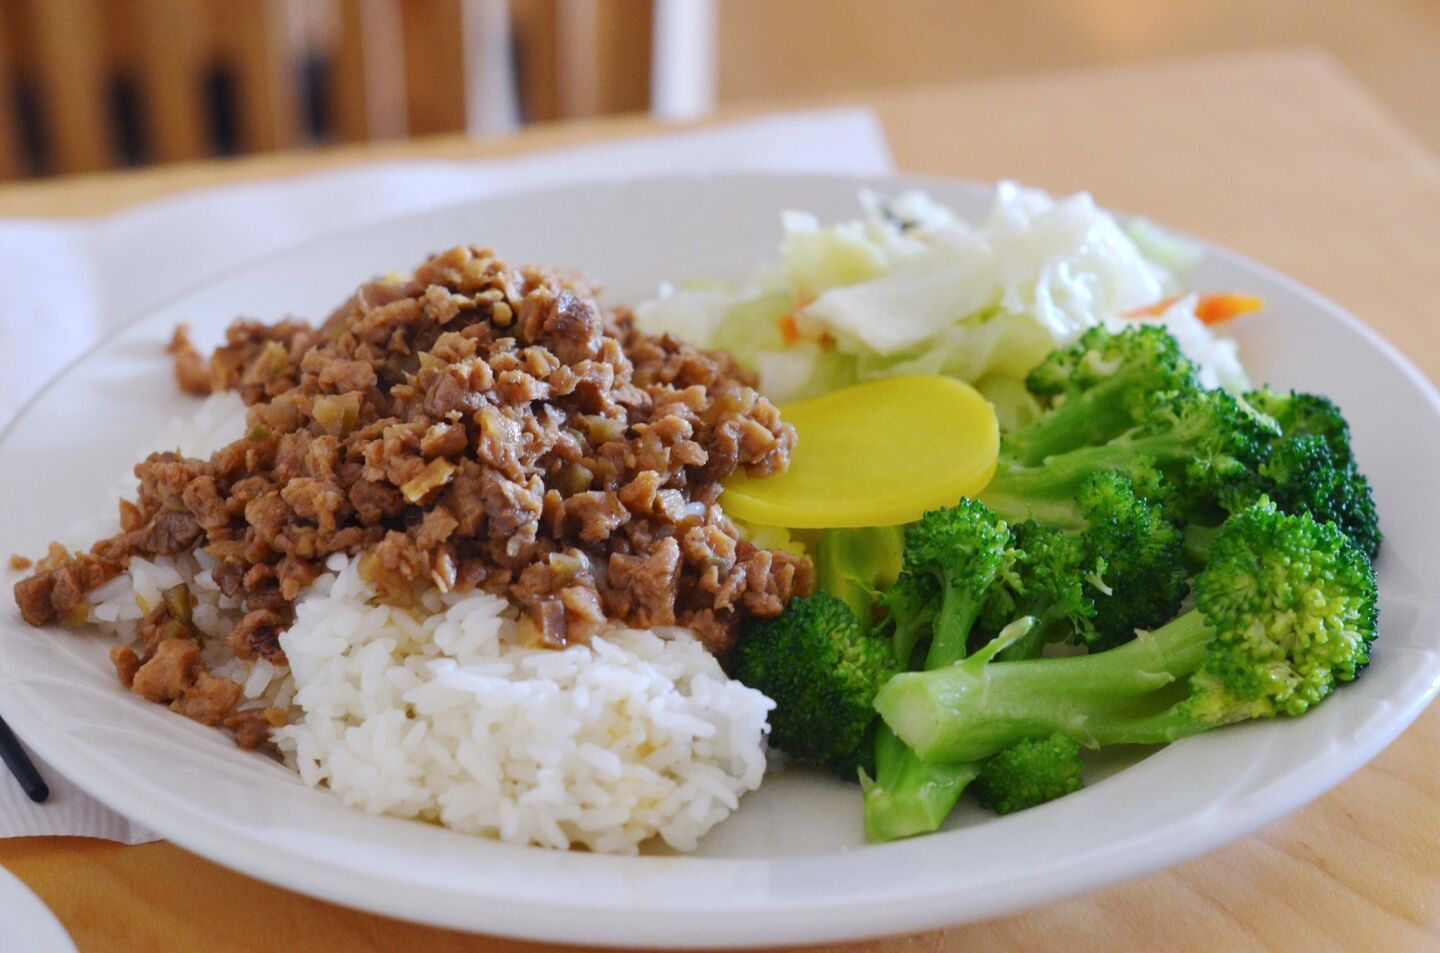 Minced "pork" over rice with steamed broccoli at Bean Sprouts.